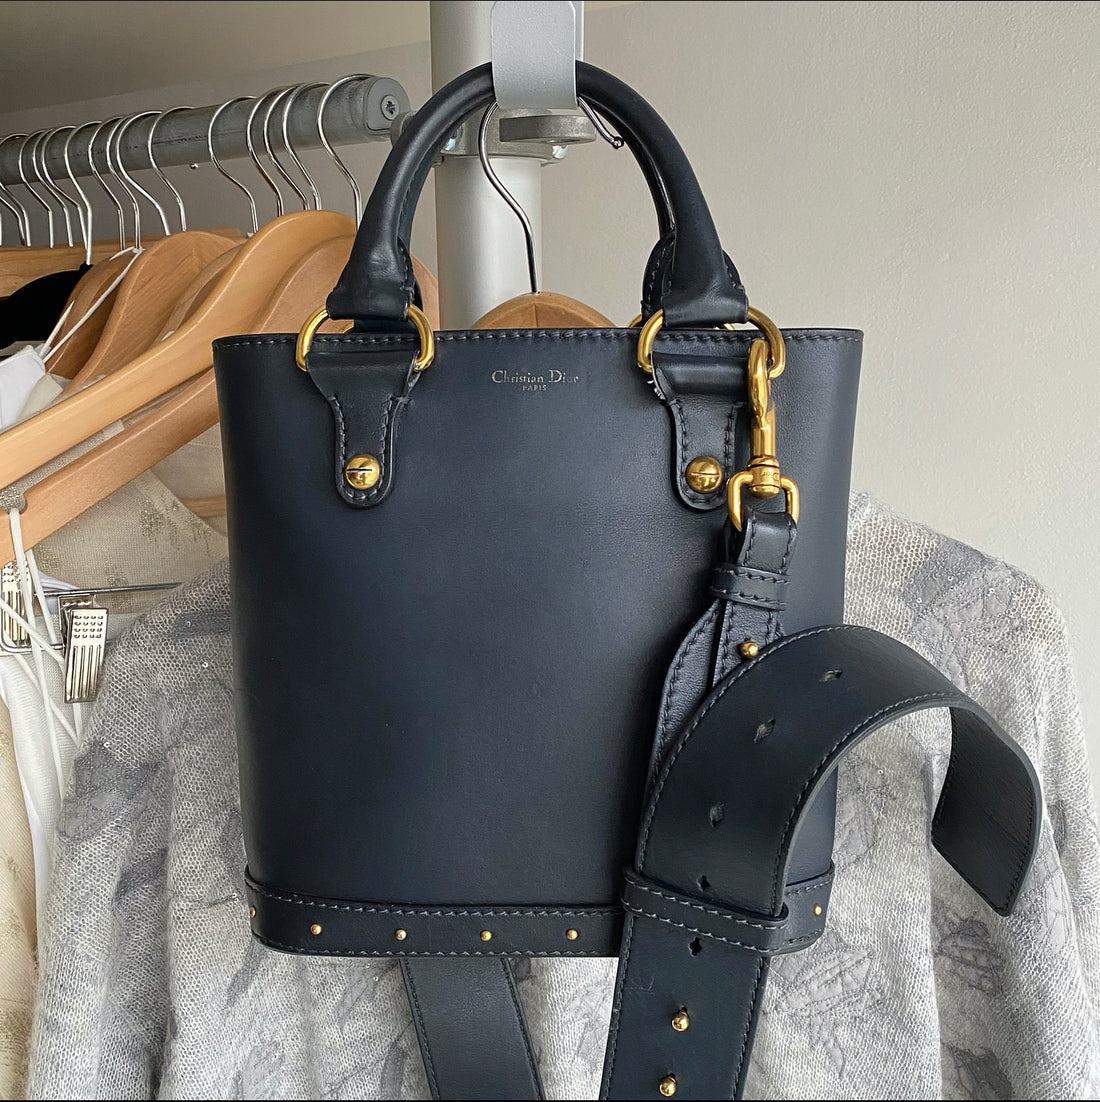 Dior DiorAvenue Small Leather Studded Bucket Bag